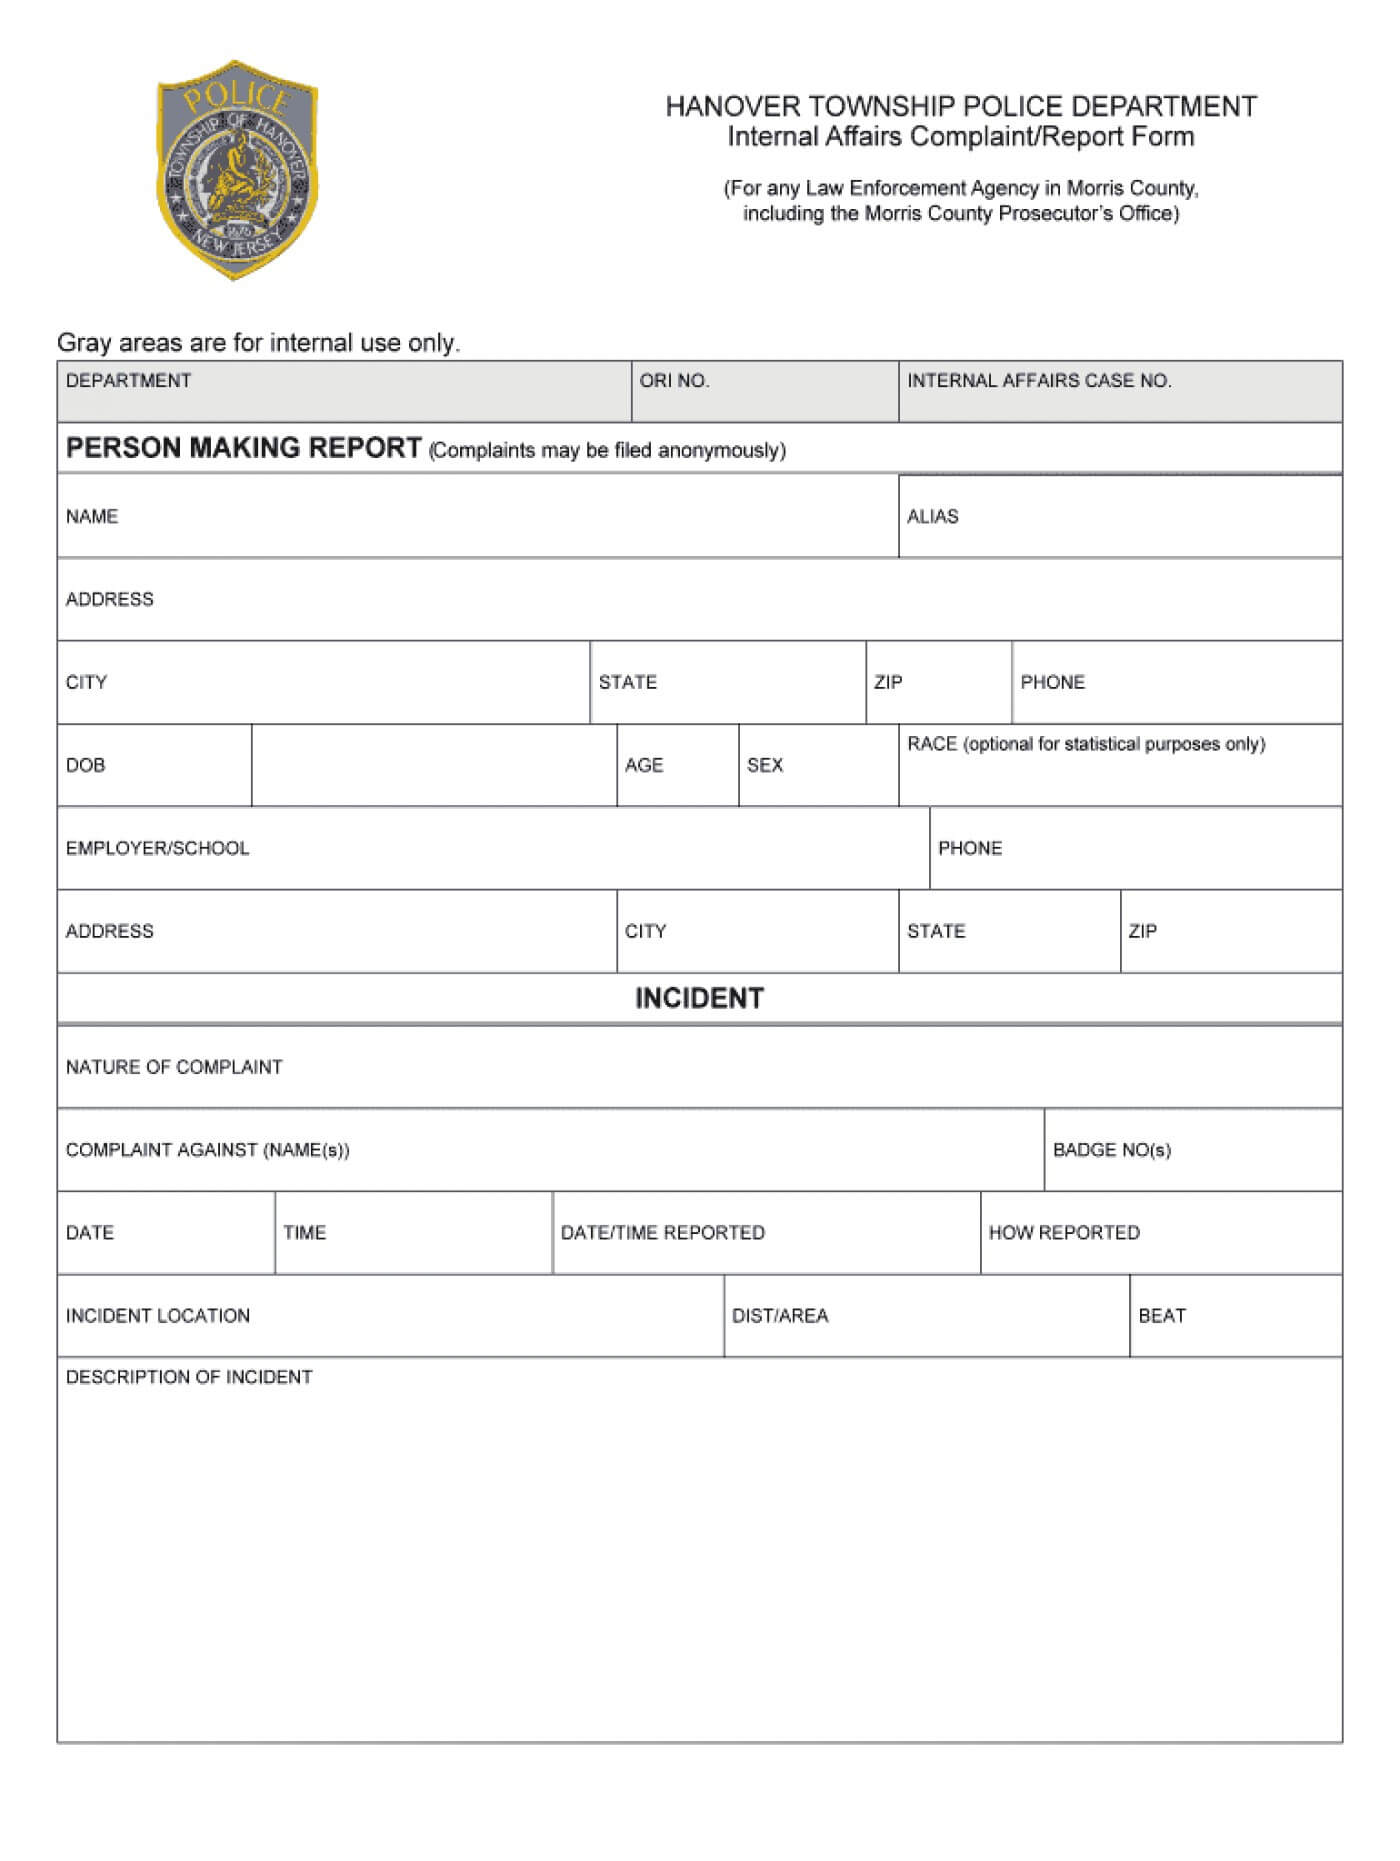 001 Blank Police Report Template Large Fantastic Ideas Free With Blank Police Report Template